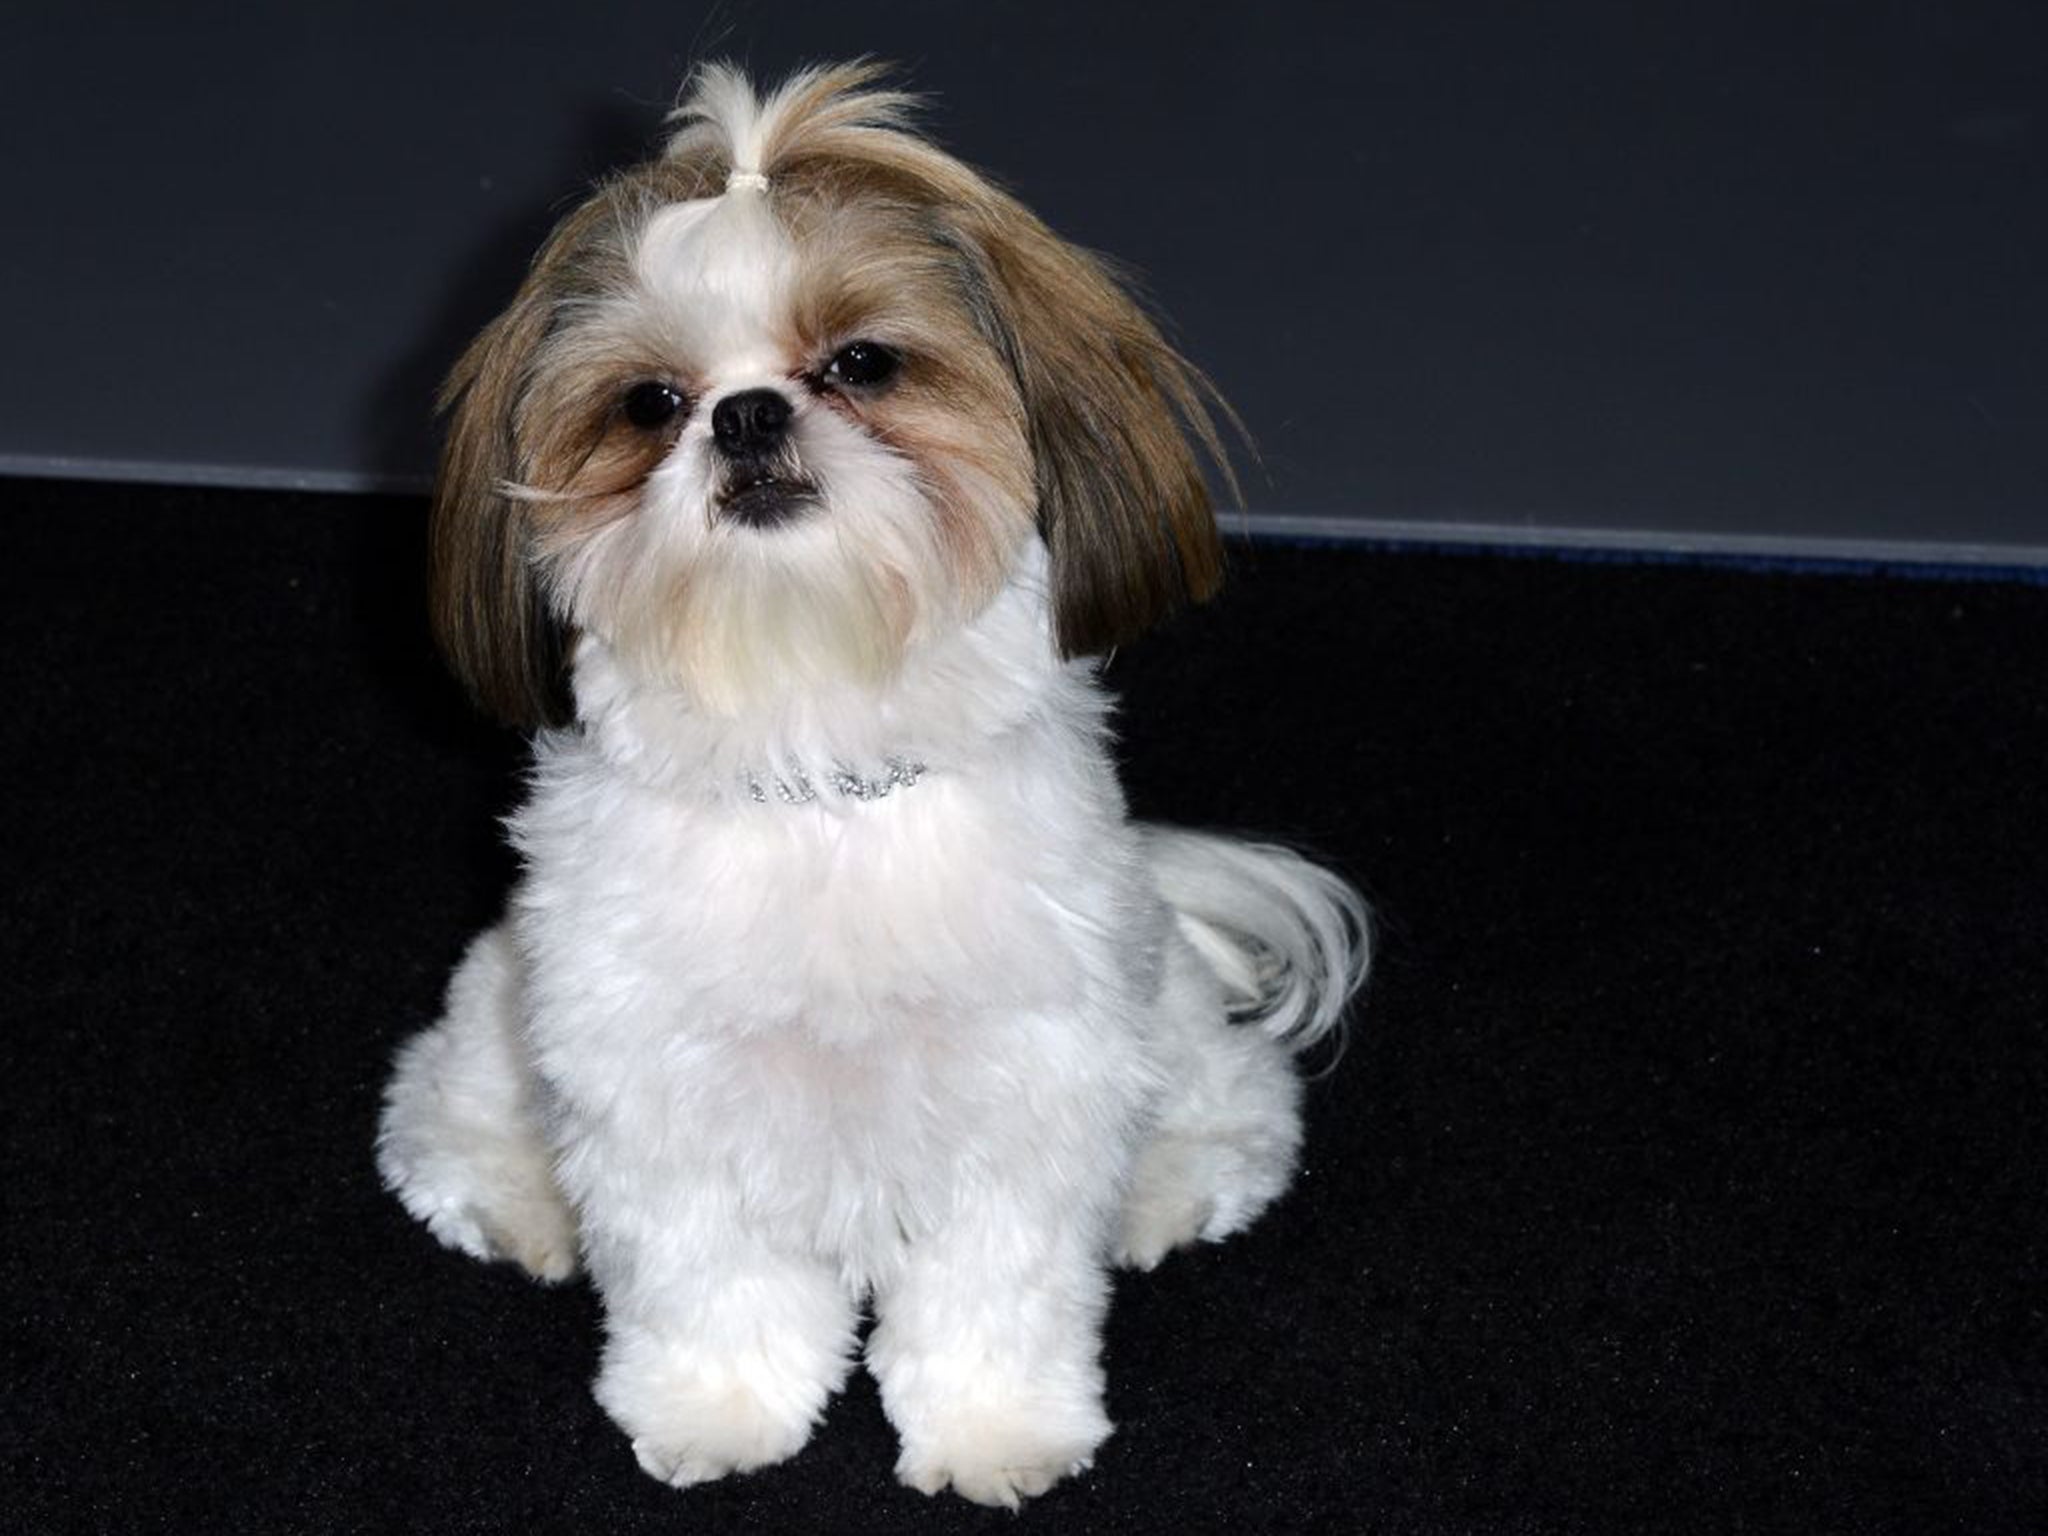 Bonny the shih tzu was the canine star of 'Seven Psychopaths'